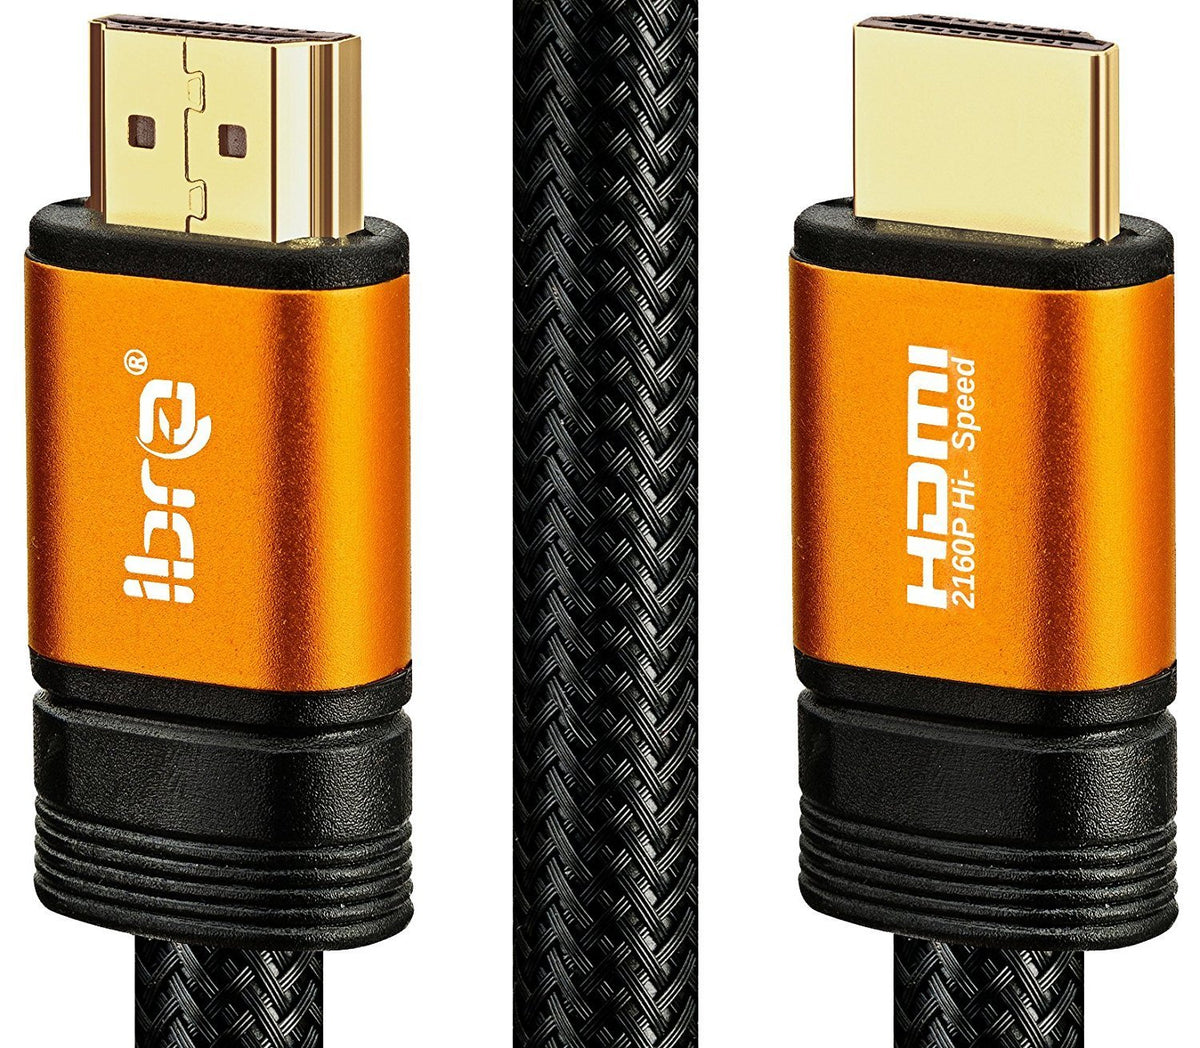 IBRA Orange HDMI Cable 8M - UHD HDMI 2.0 (4K@60Hz) Ready -18Gbps-28AWG Braided Cord -Gold Plated Connectors -Ethernet,Audio Return-Video 4K 2160p,HD 1080p,3D -Xbox PlayStation PS3 PS4 PC Apple TV